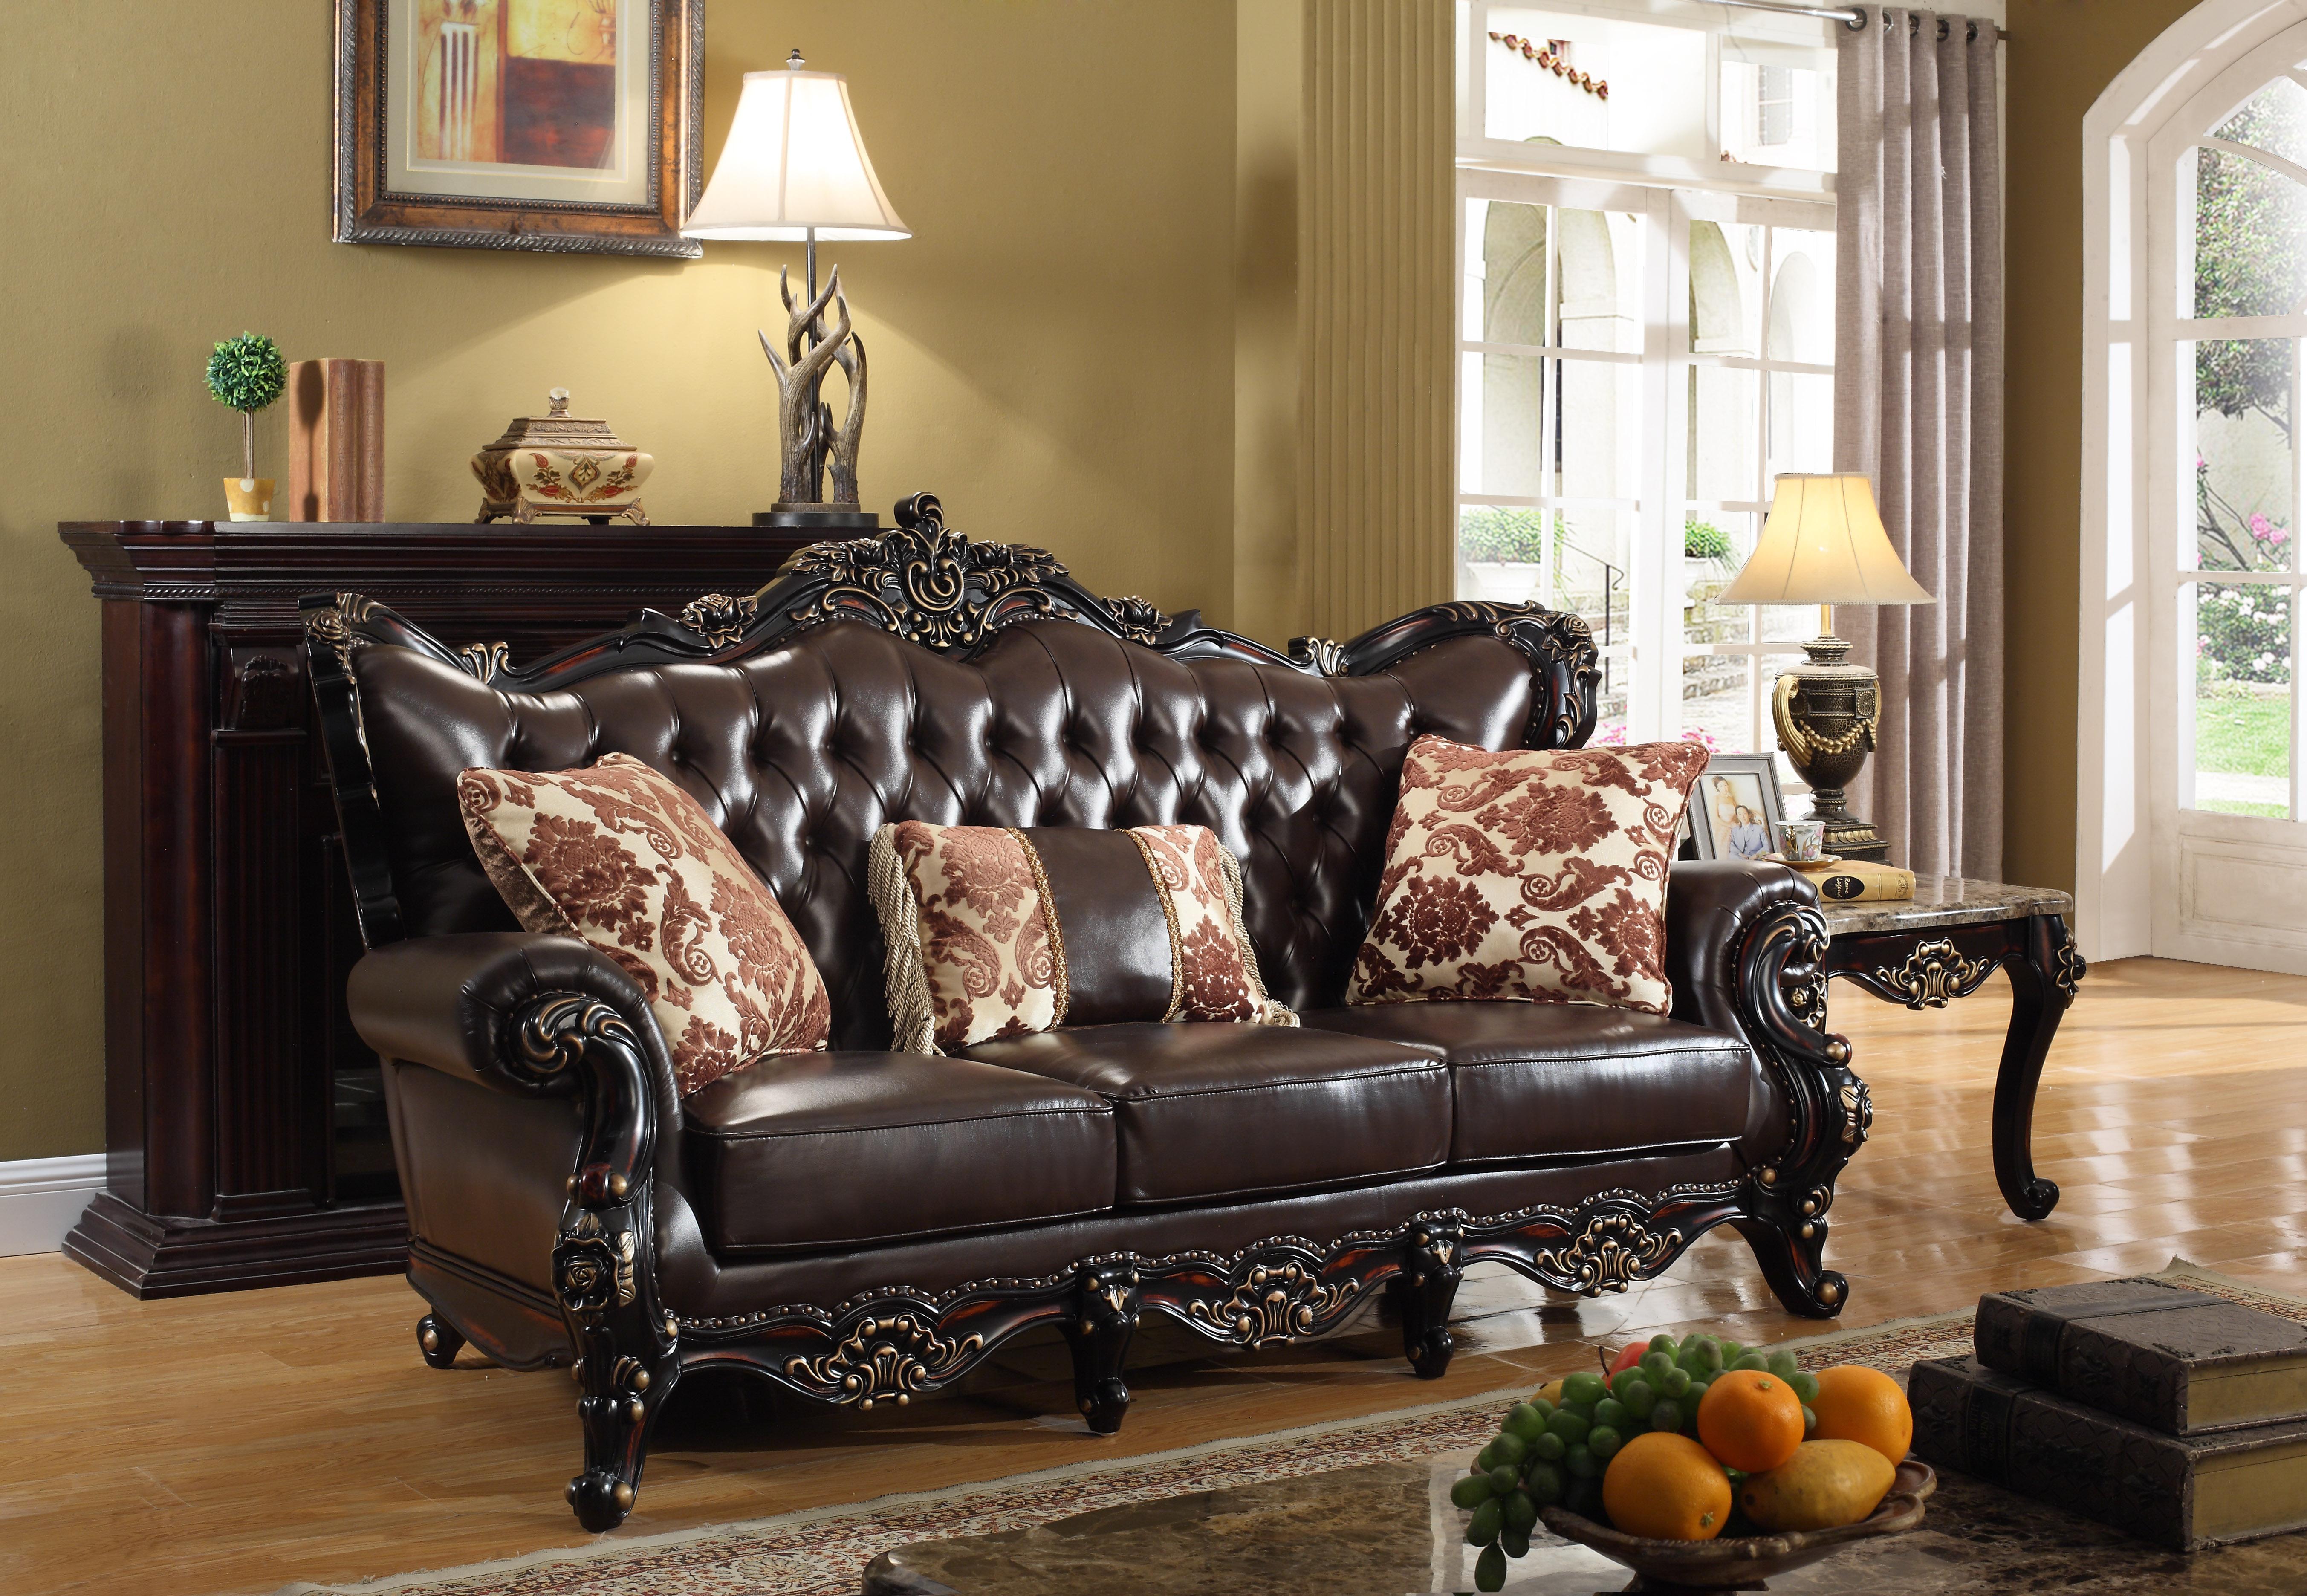 

    
Meridian 675 Barcelona Living Room Sofa in Rich Cherry Traditional Style
